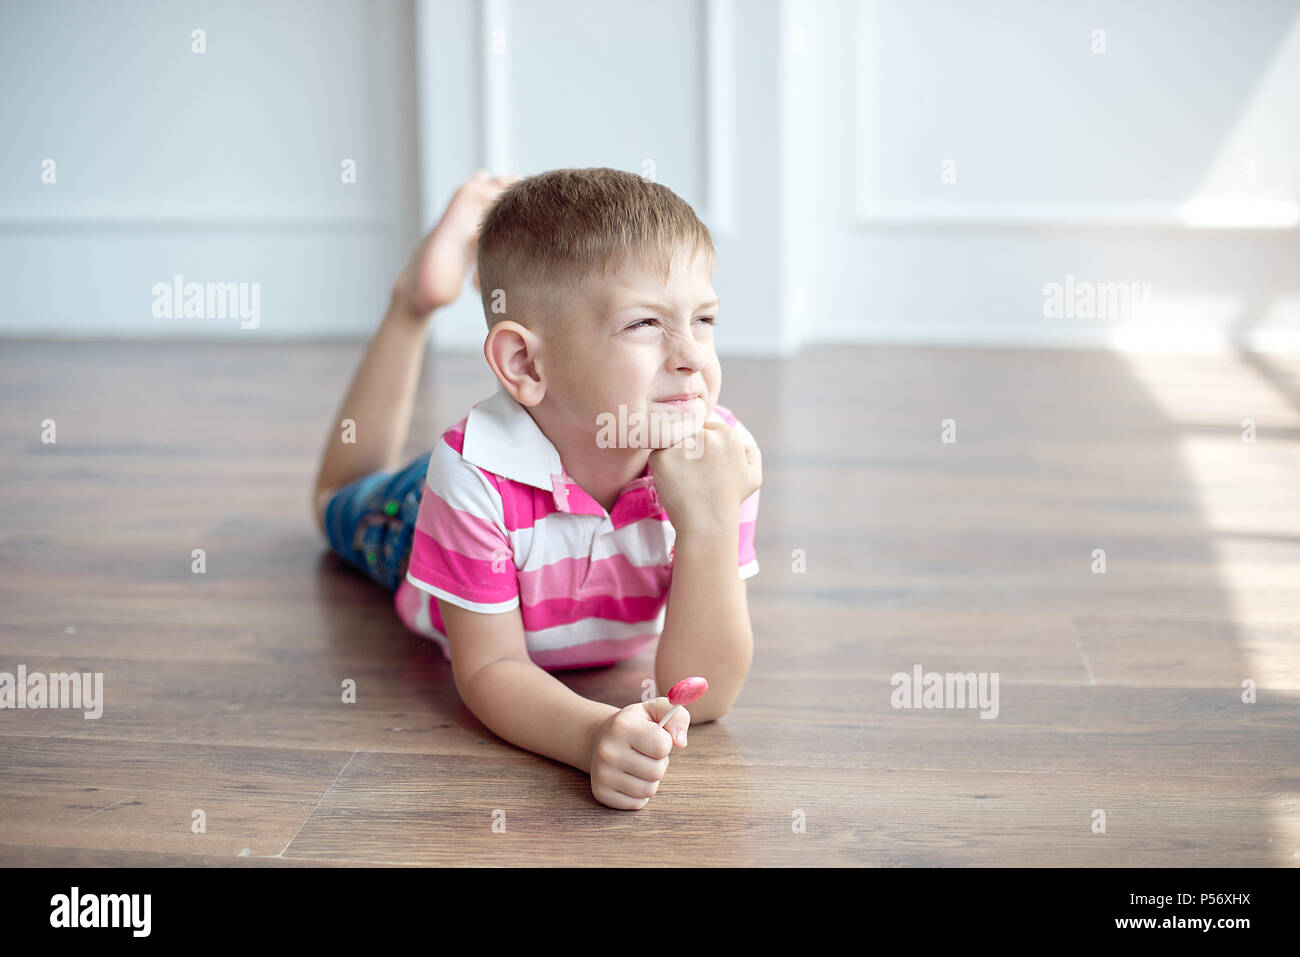 Little Cute Boy With Modern Haircut Sitting On The Floor In Big